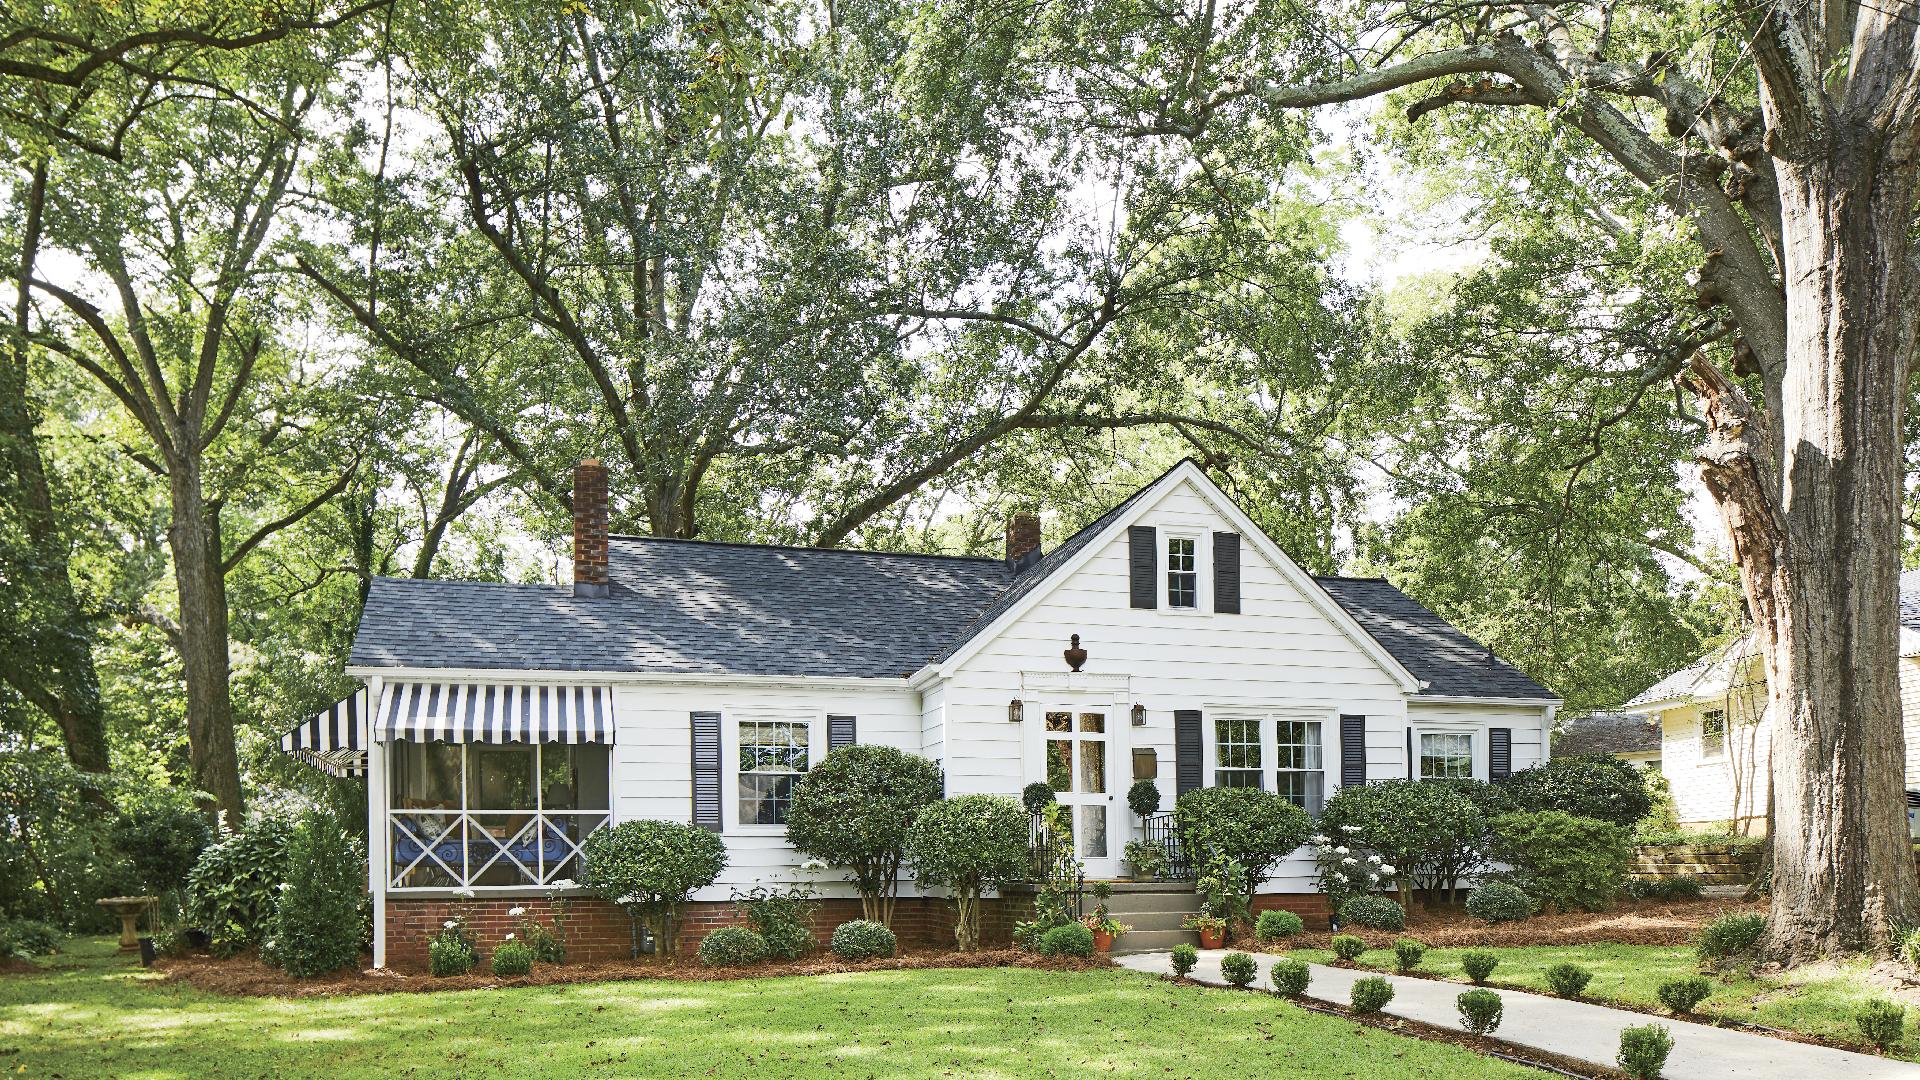 This South Carolina Cottage is Bursting With Charm Color and